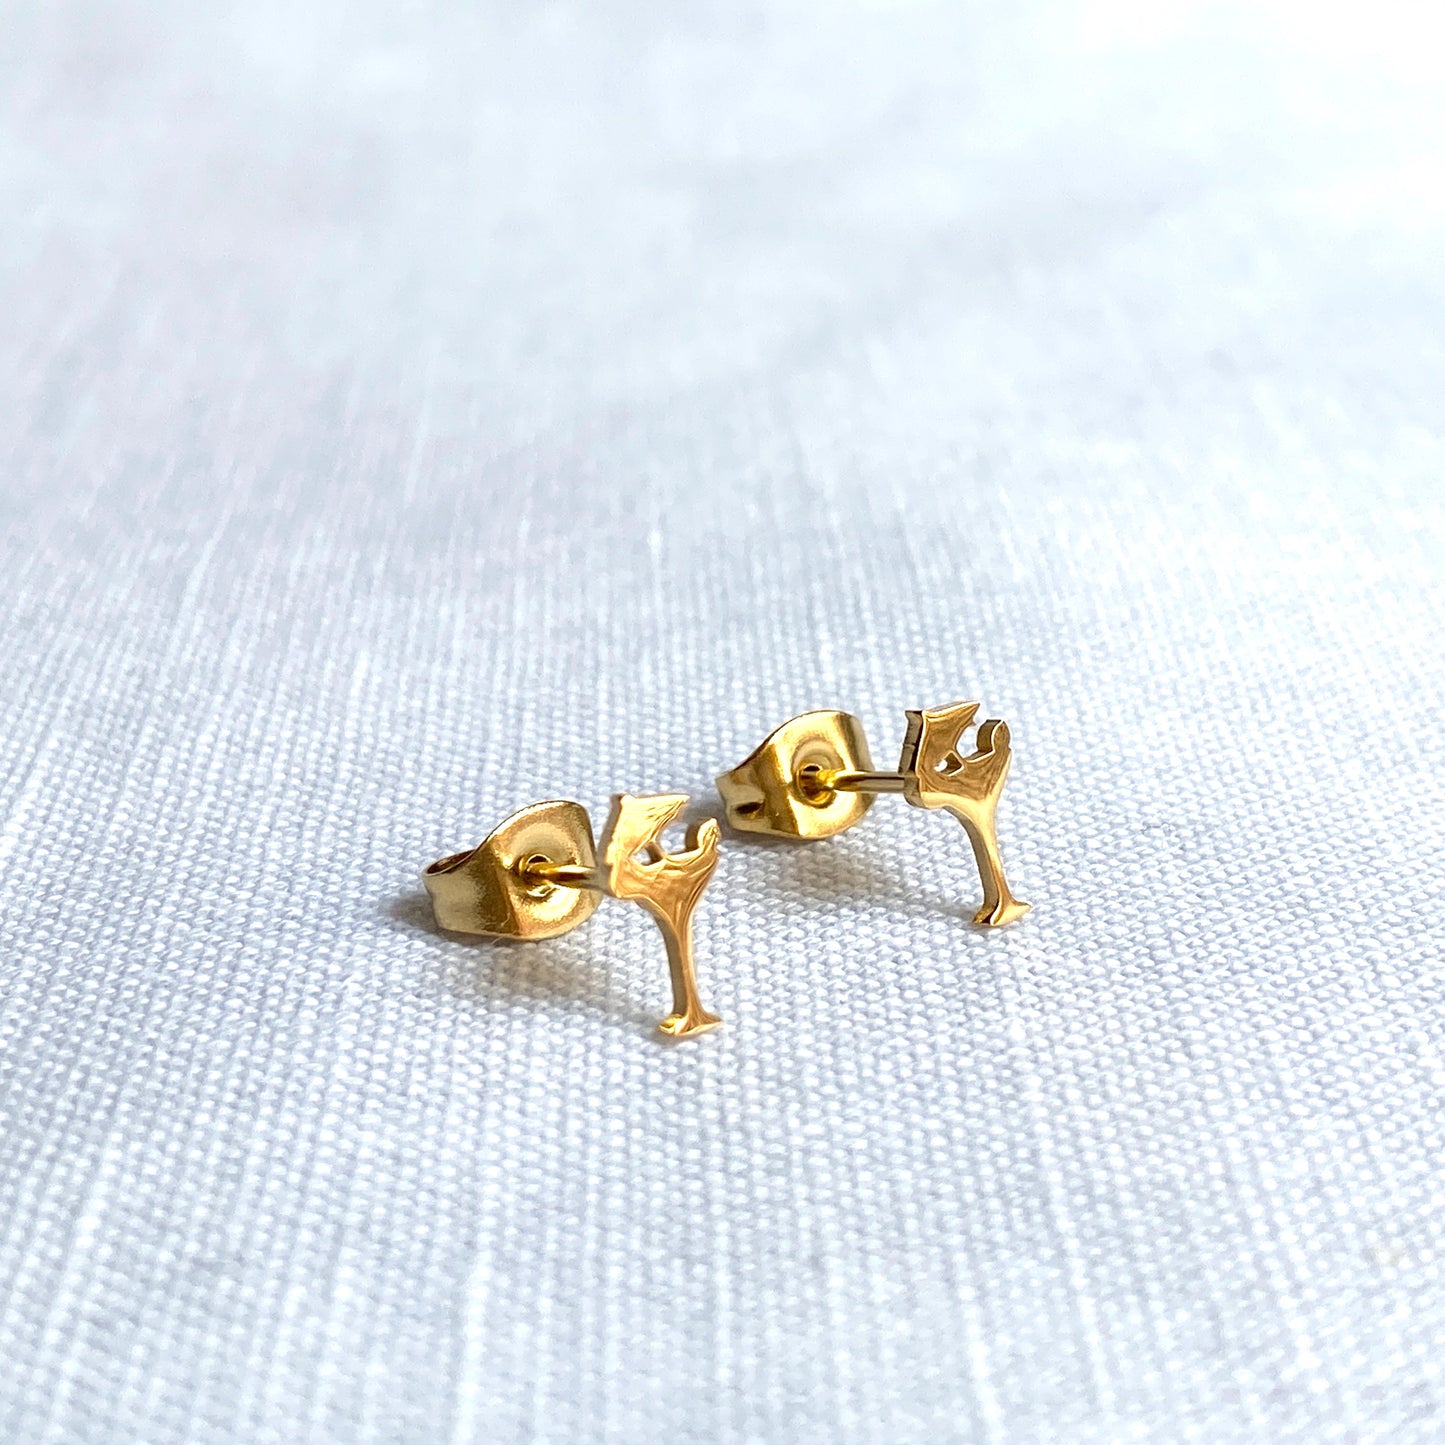 Cocktail Glass Earring Studs Gold